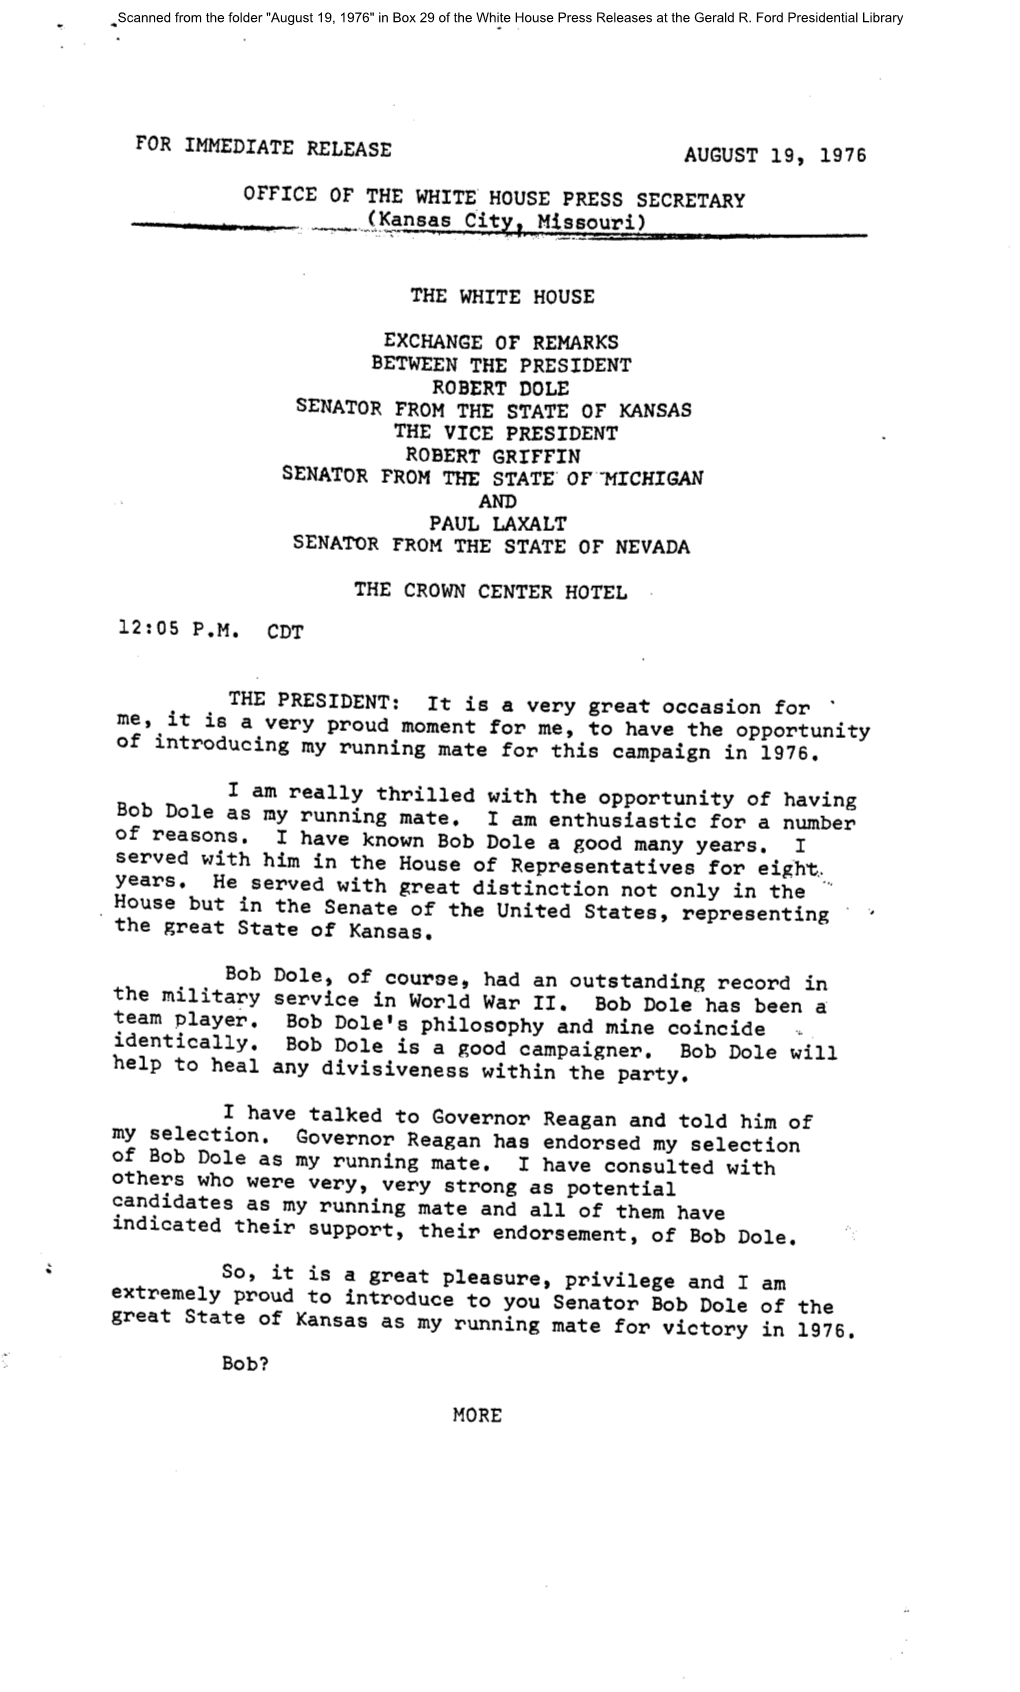 August 19, 1976" in Box 29 of the White House Press Releases at the Gerald R